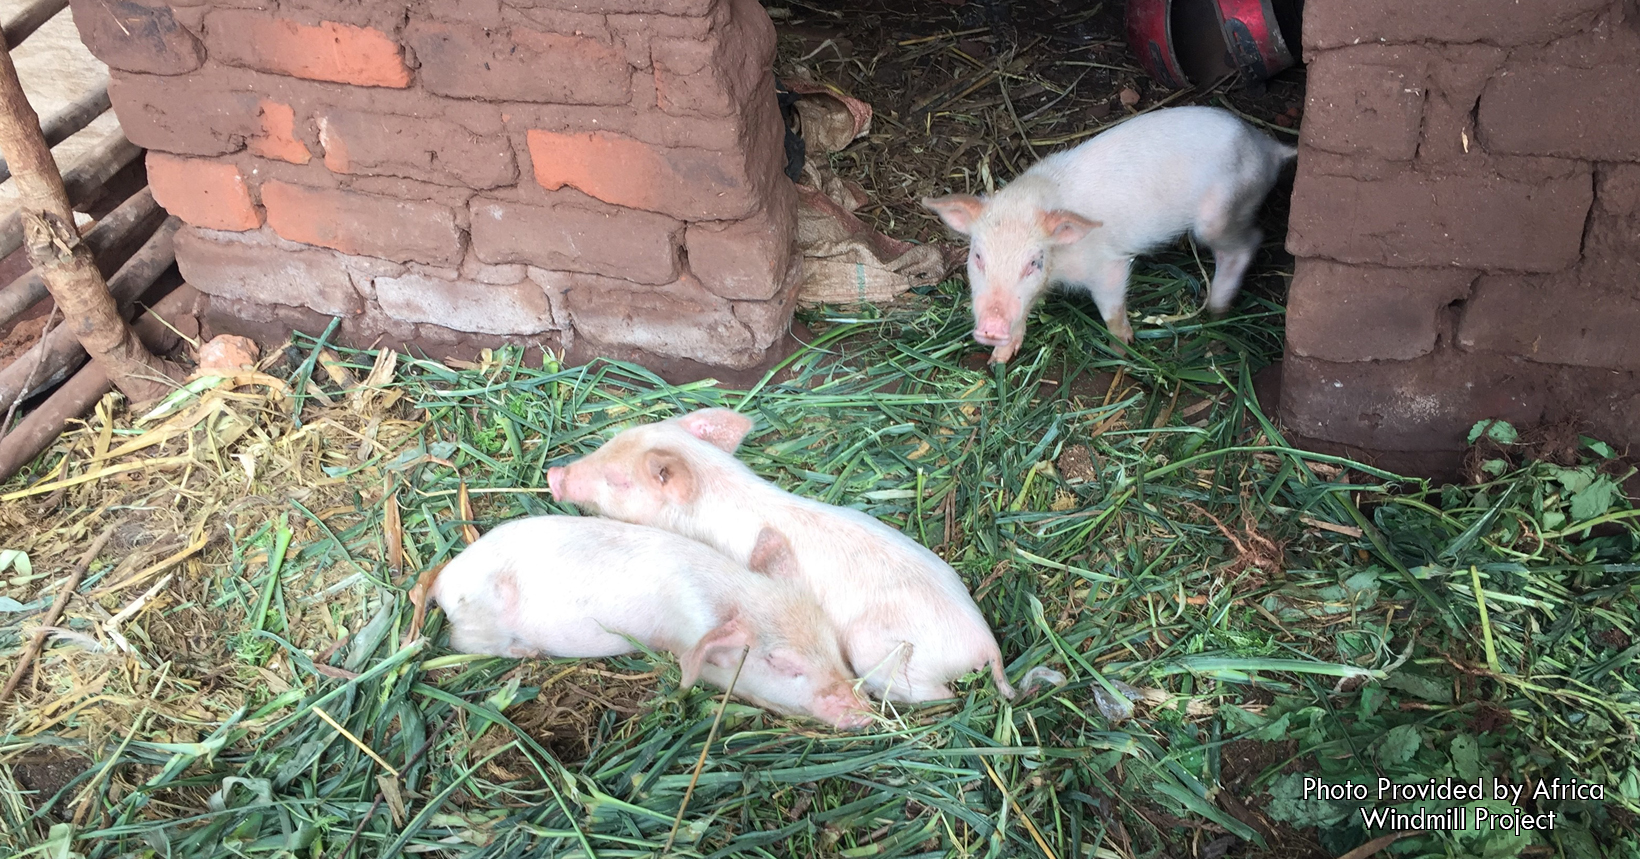 A few pigs were bought by Mercy Kamdambo after her successful harvest of her crops.